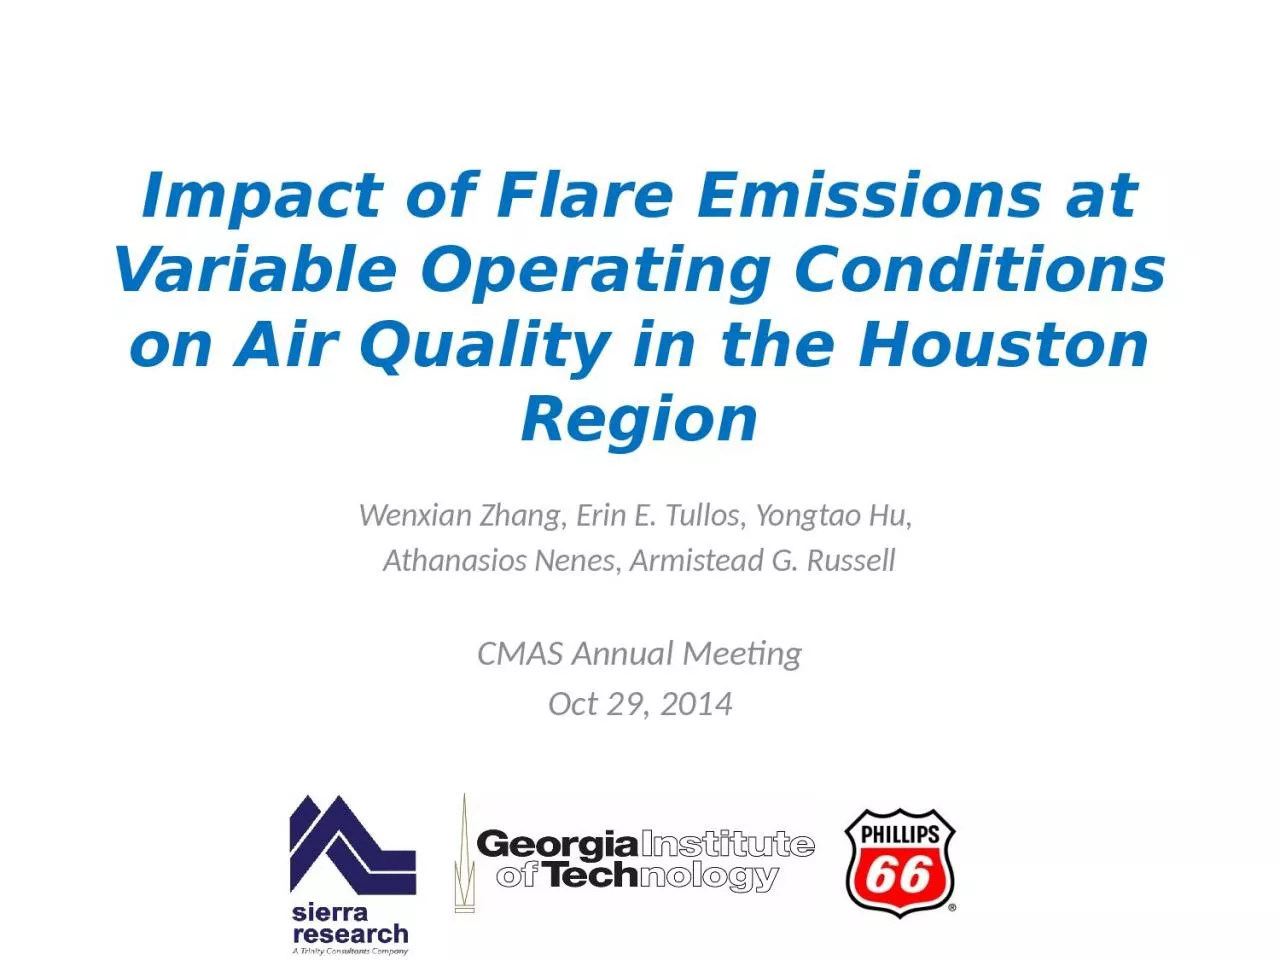 Impact of Flare Emissions at Variable Operating Conditions on Air Quality